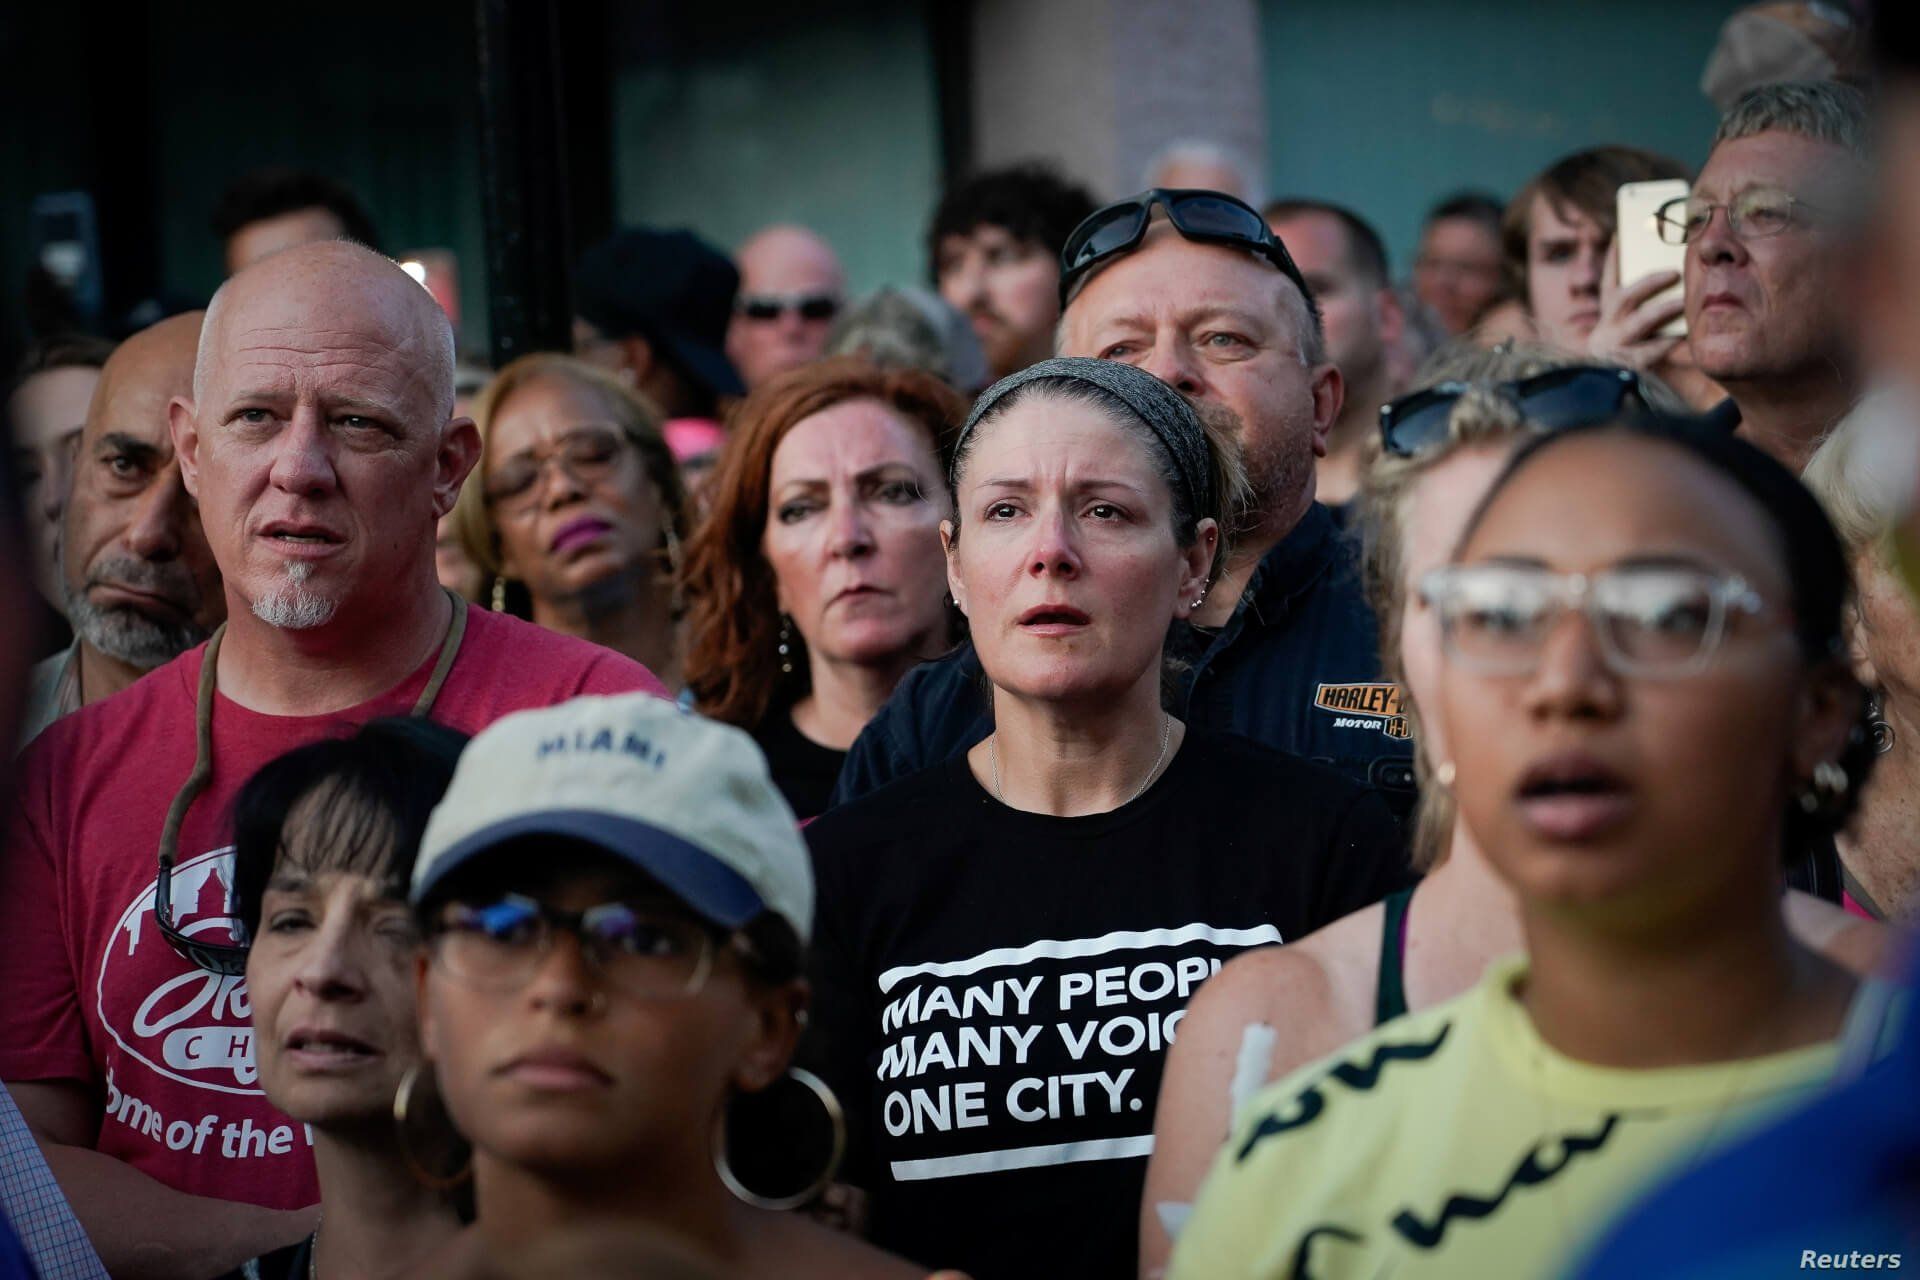 Mourners attend a vigil at the scene after a mass shooting in Dayton, Ohio, Aug. 4, 2019